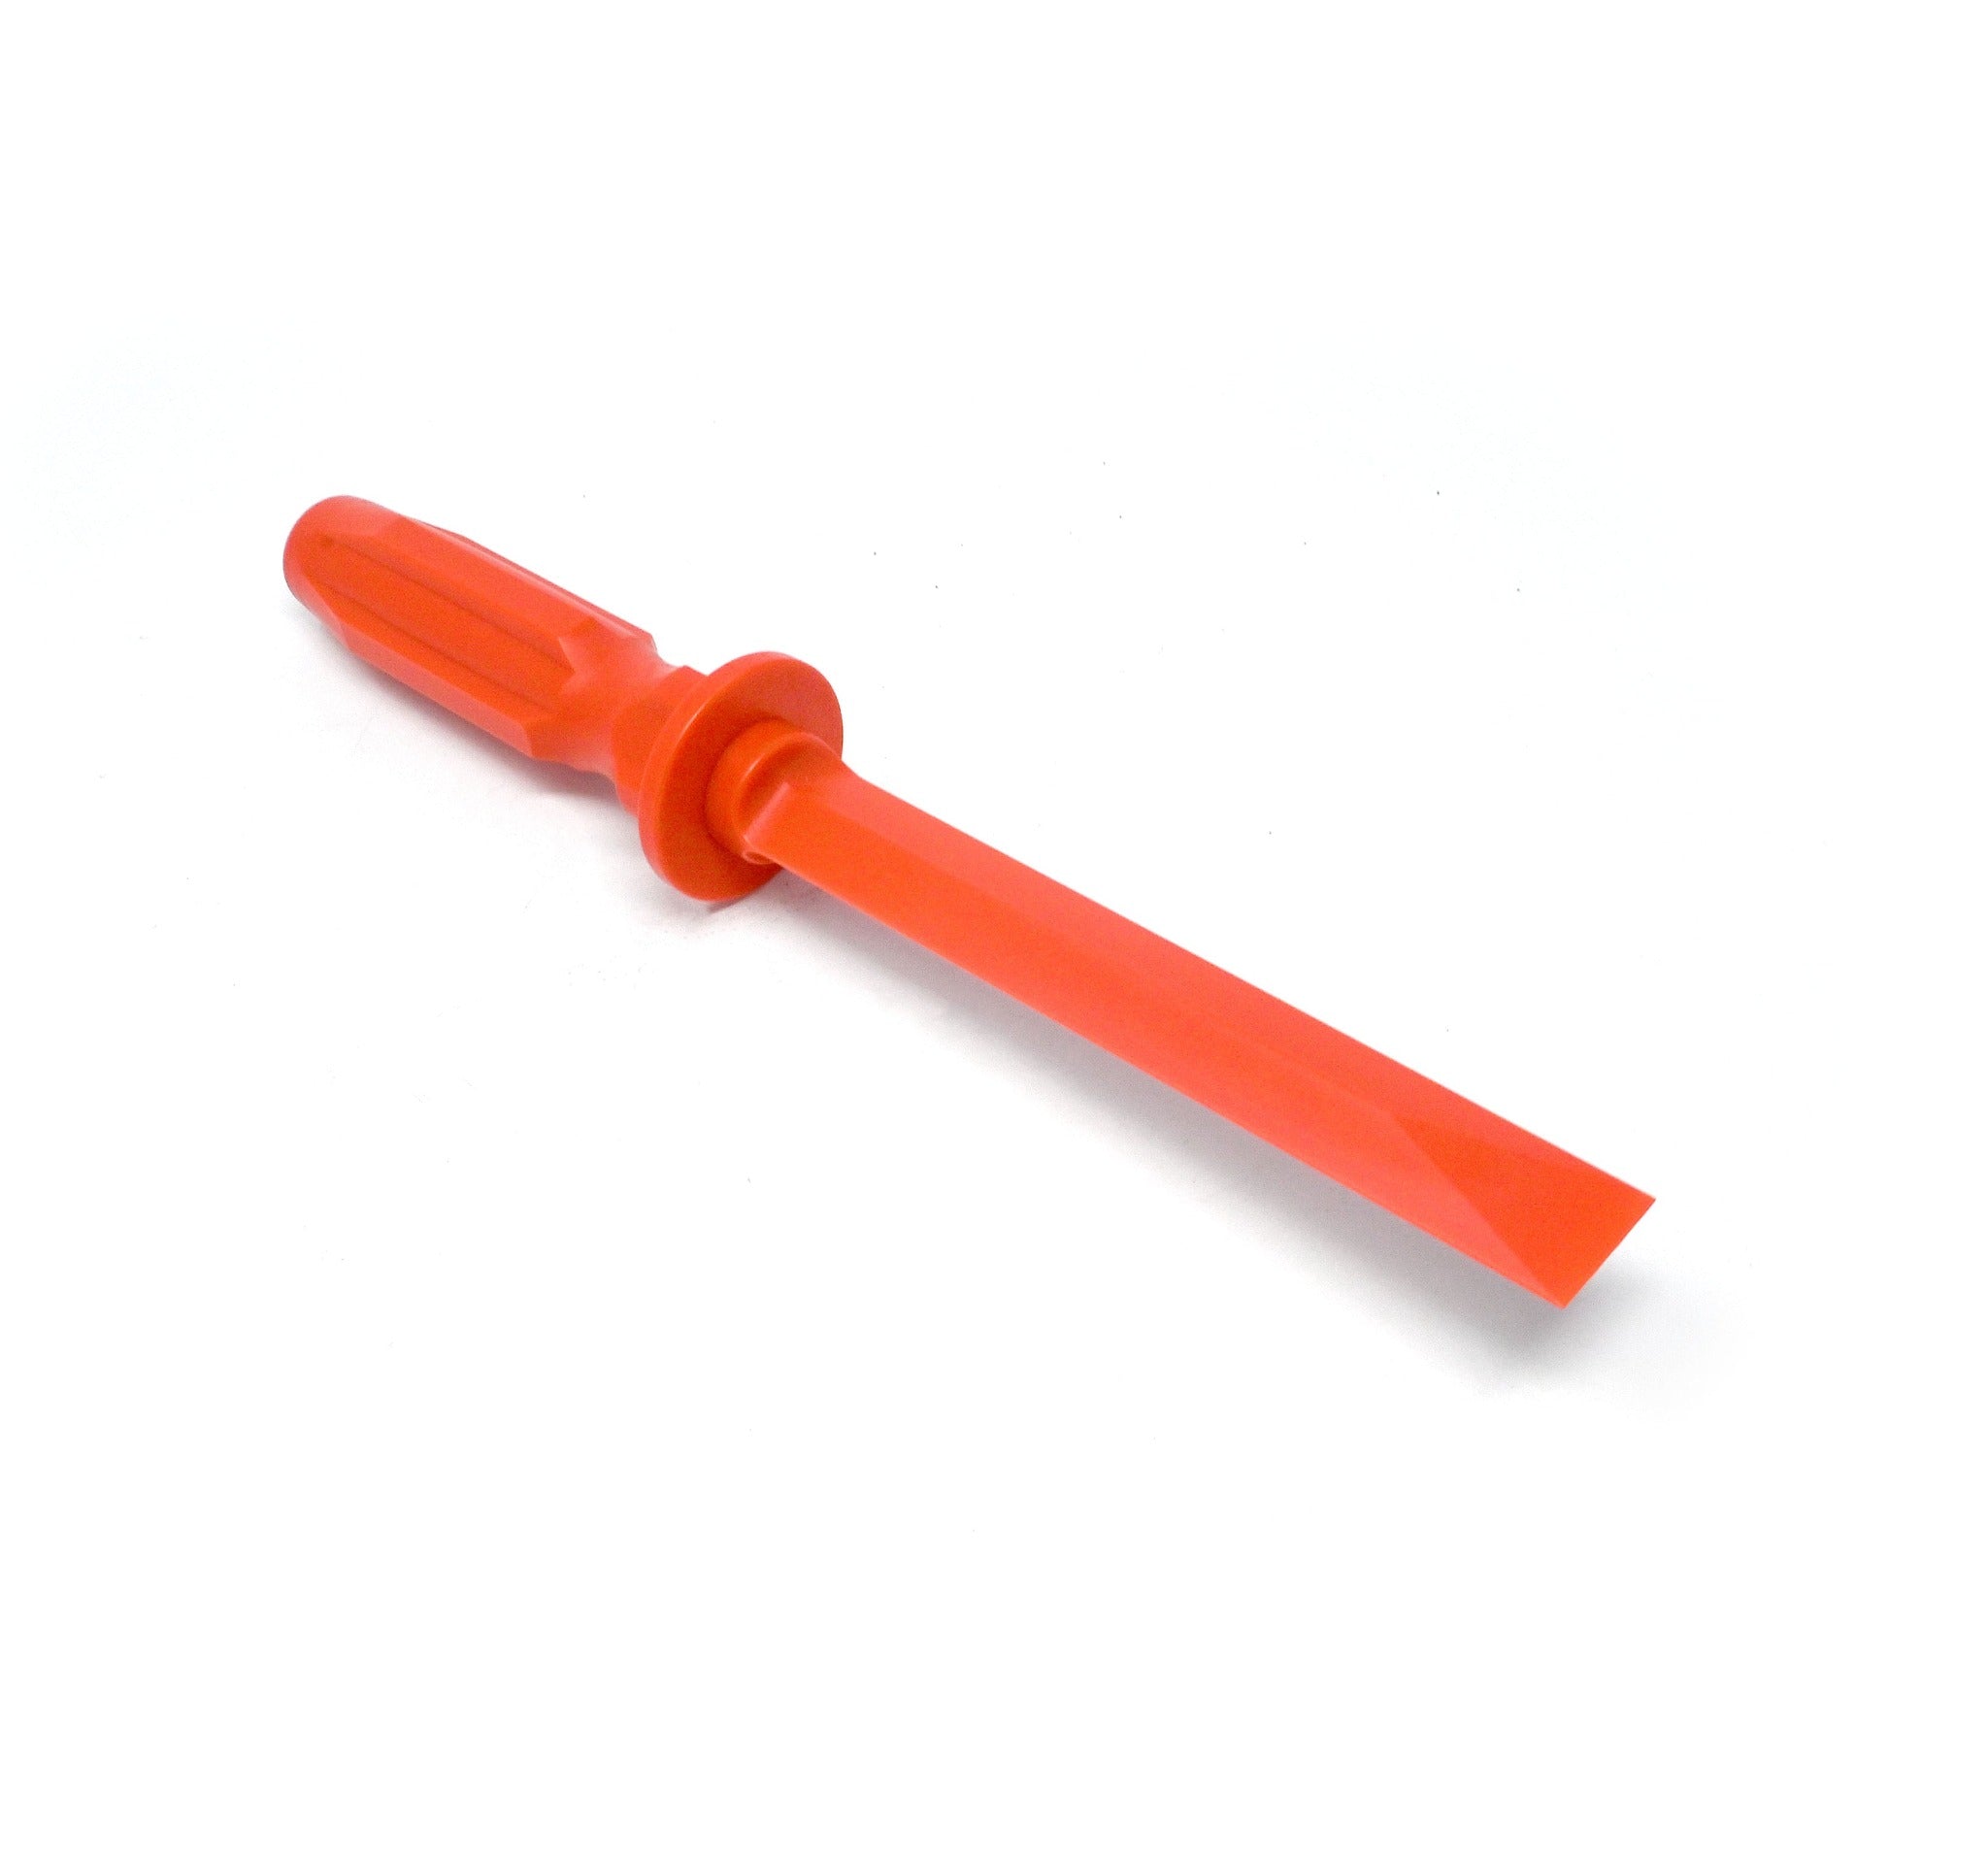 Wheel Weight Plastic Removal Tool/Scraper   Red